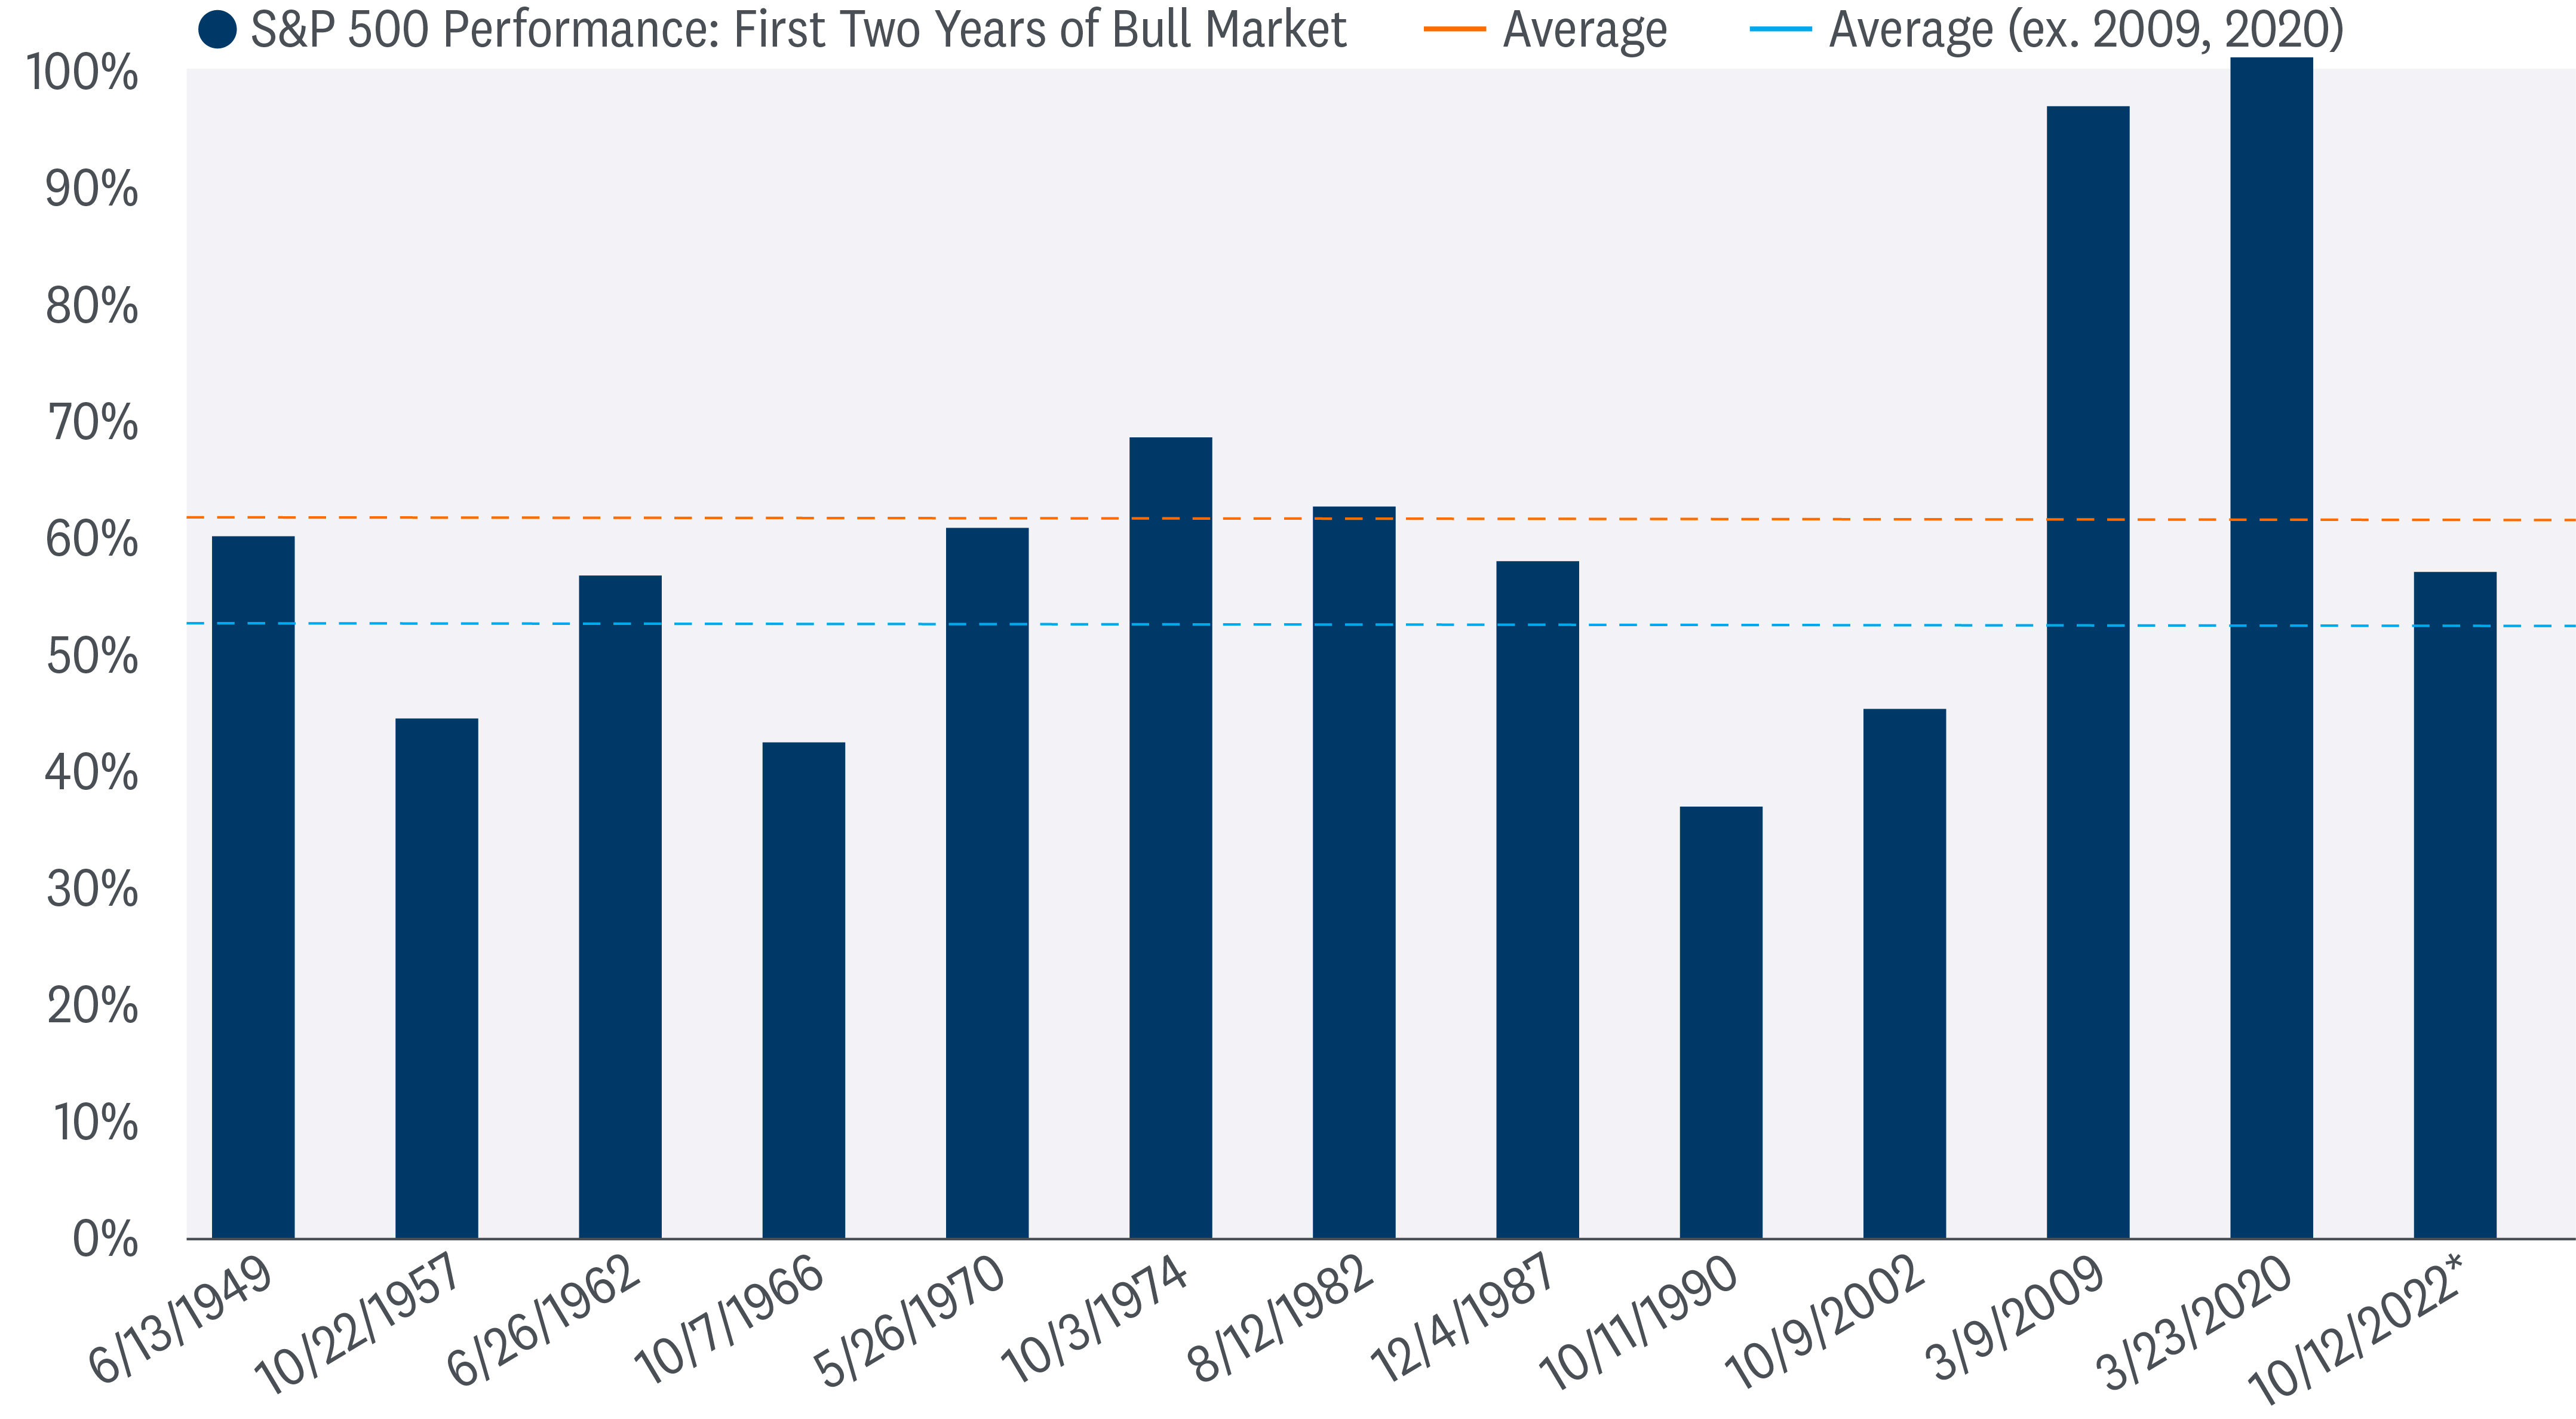 Bar graph of S&P 500 performance in the first two years of bull markets from 1949 to 2022, highlighting S&P 500 has performed above average in most bull markets. The only bull markets where S&P 500 performed below average are 1962, 1990, and 2002 bull markets. The chart also notes 2009 and 2020 bull markets had very high returns, which is why the average return for all bull markets is higher than the average return for all bull markets except for 2009 and 2020. 